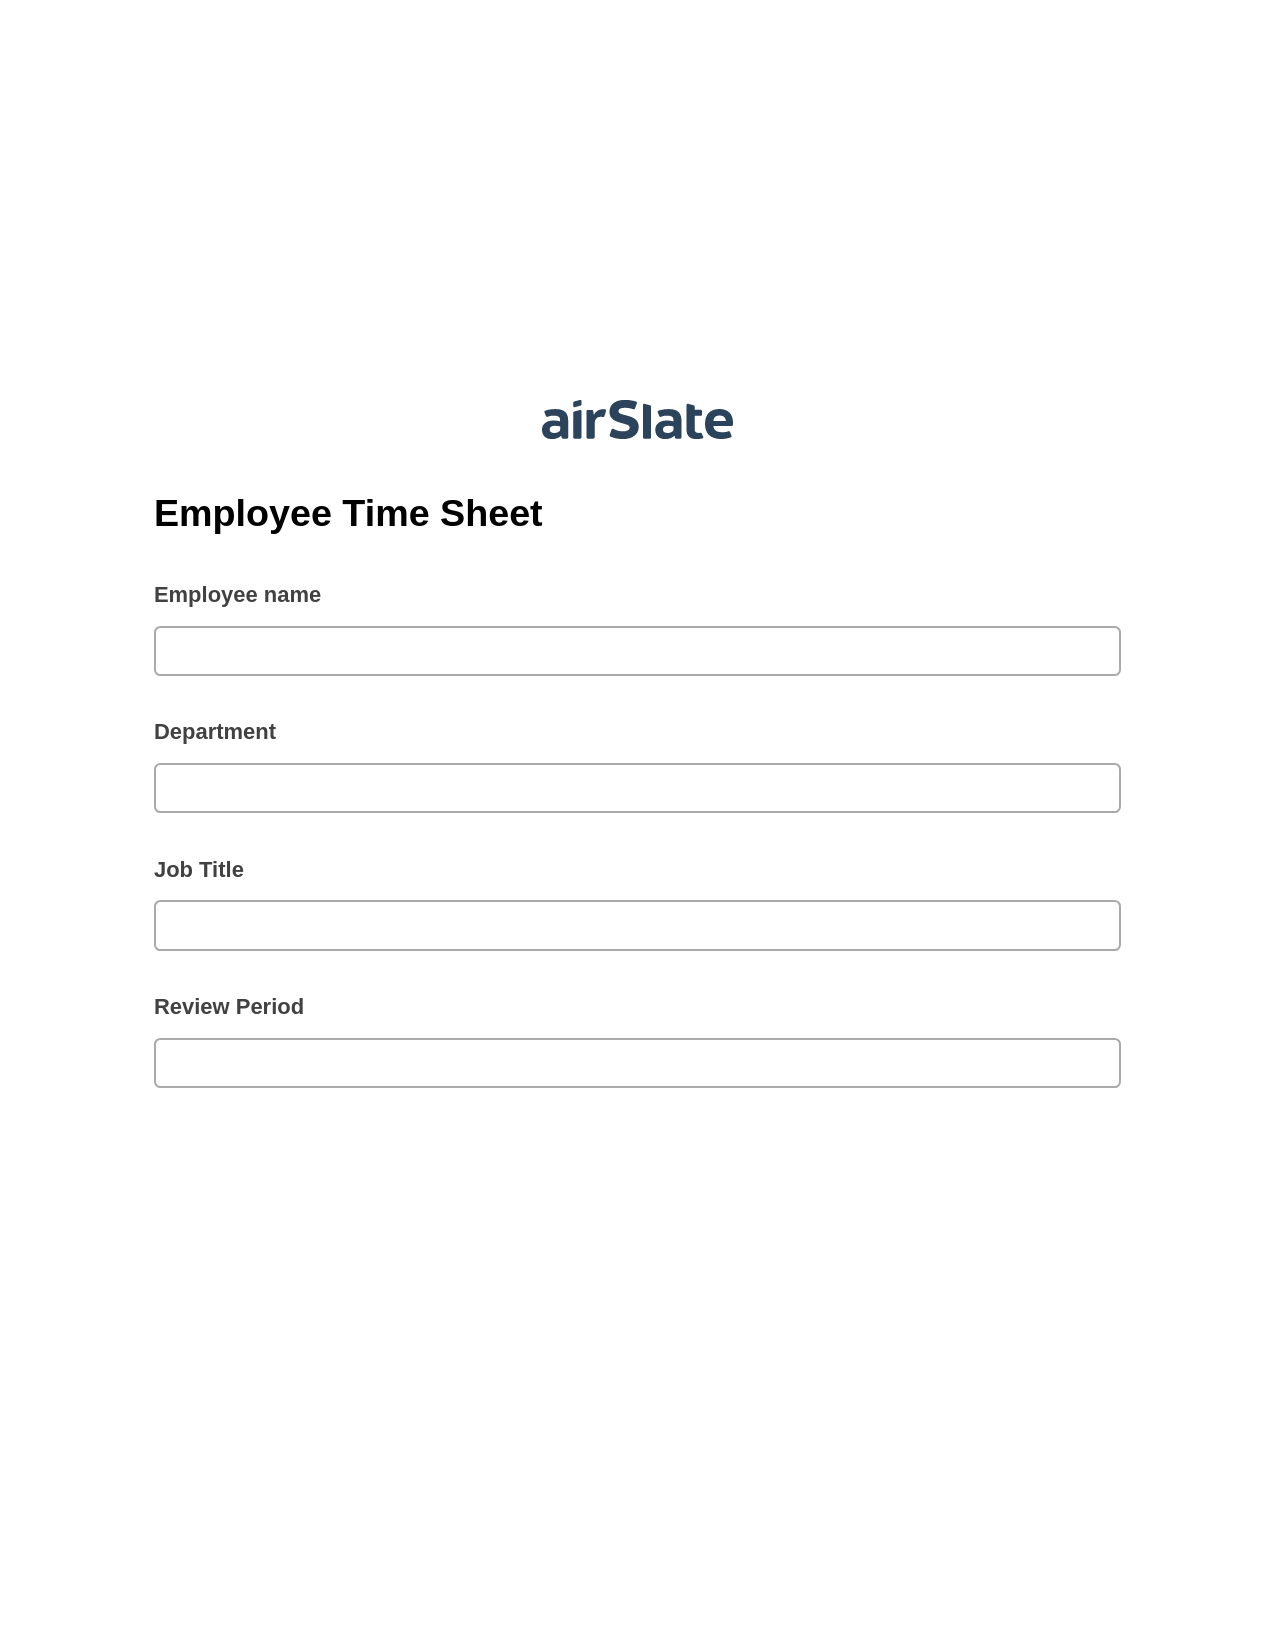 Multirole Employee Time Sheet Pre-fill from Salesforce Records Bot, Create slate addon, Archive to Box Bot